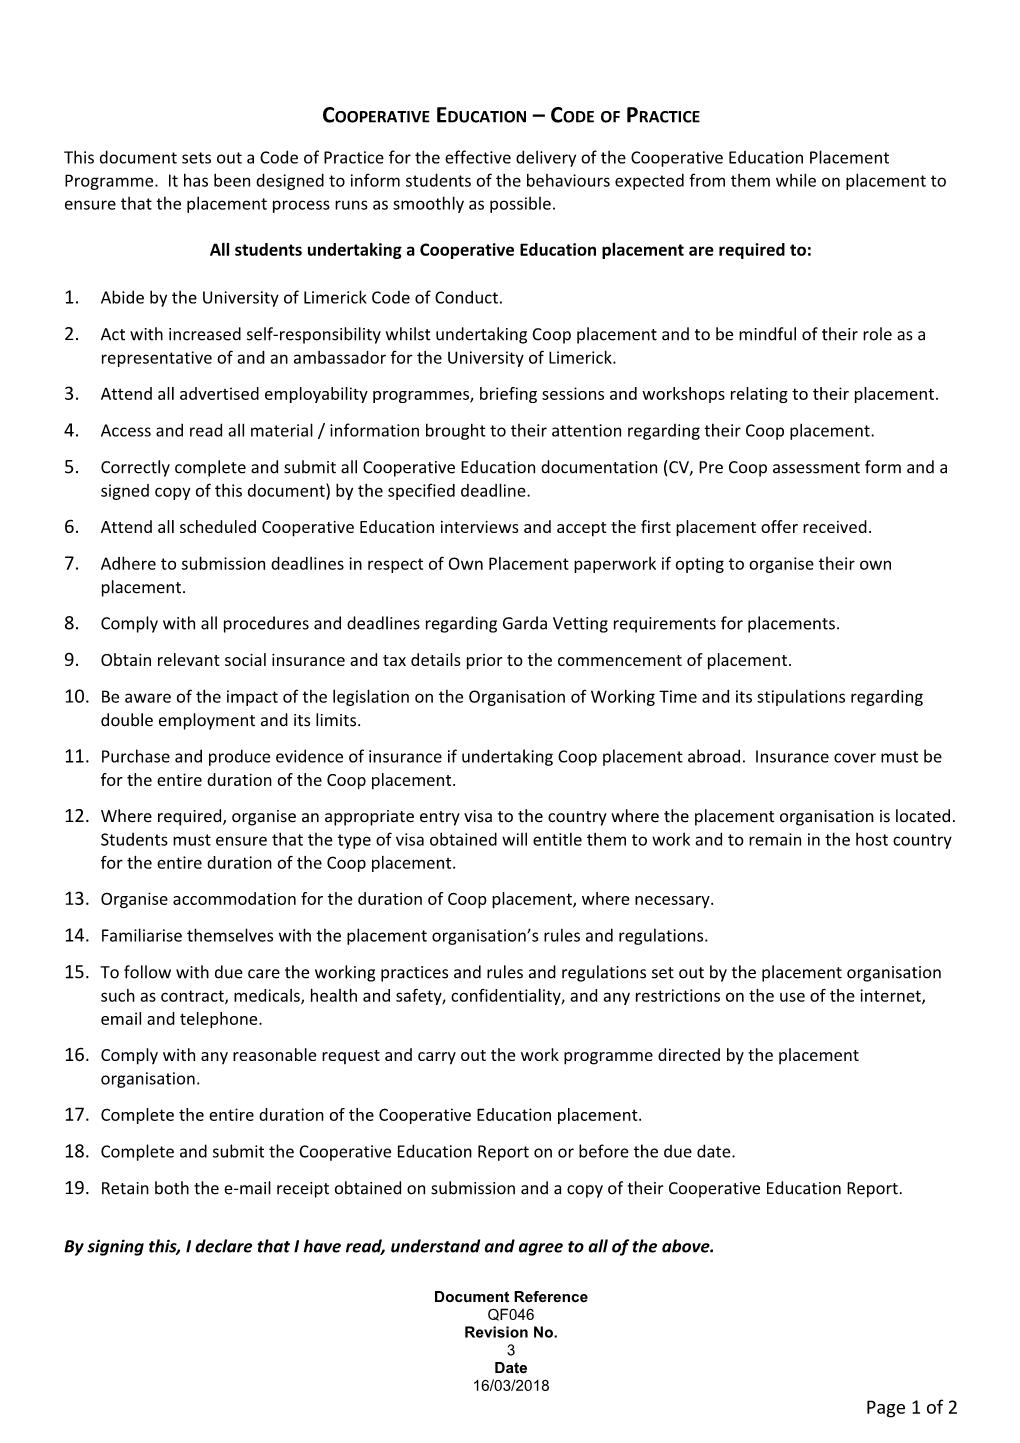 Cooperative Education Code of Practice